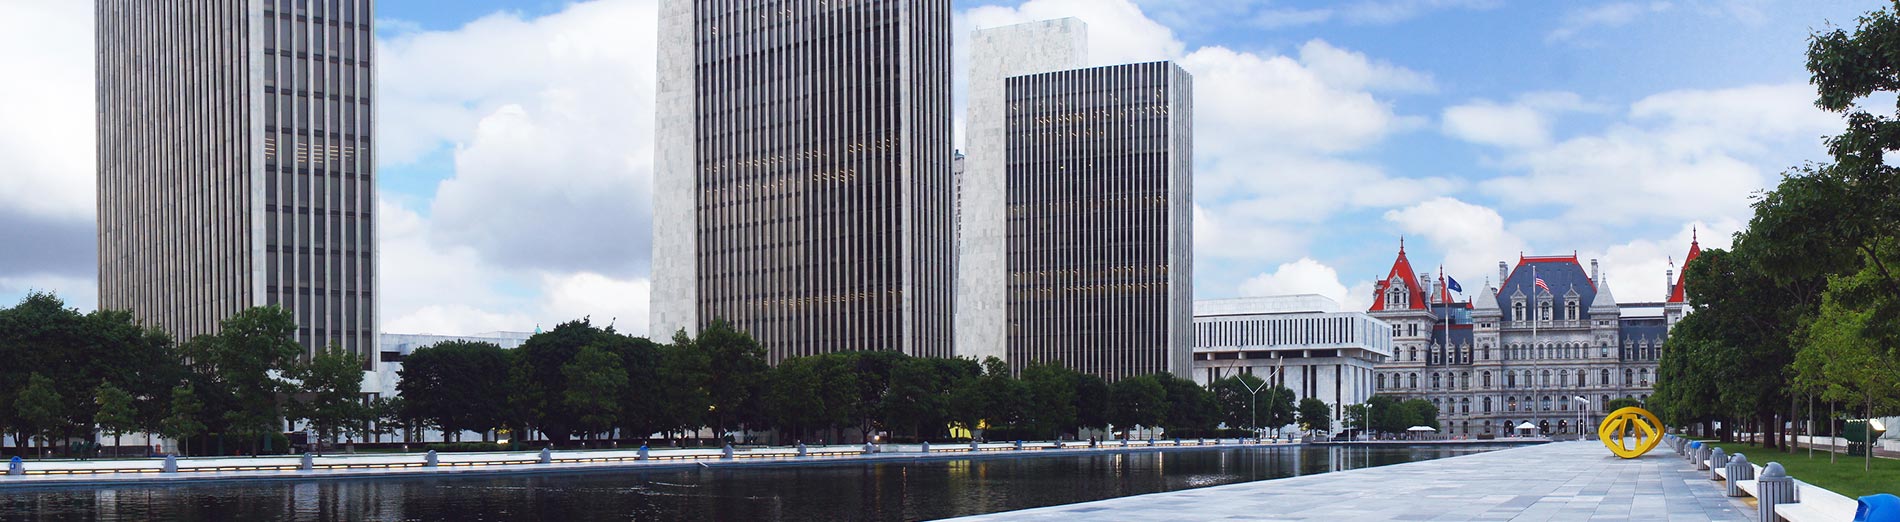 A view of the Empire State Plaza